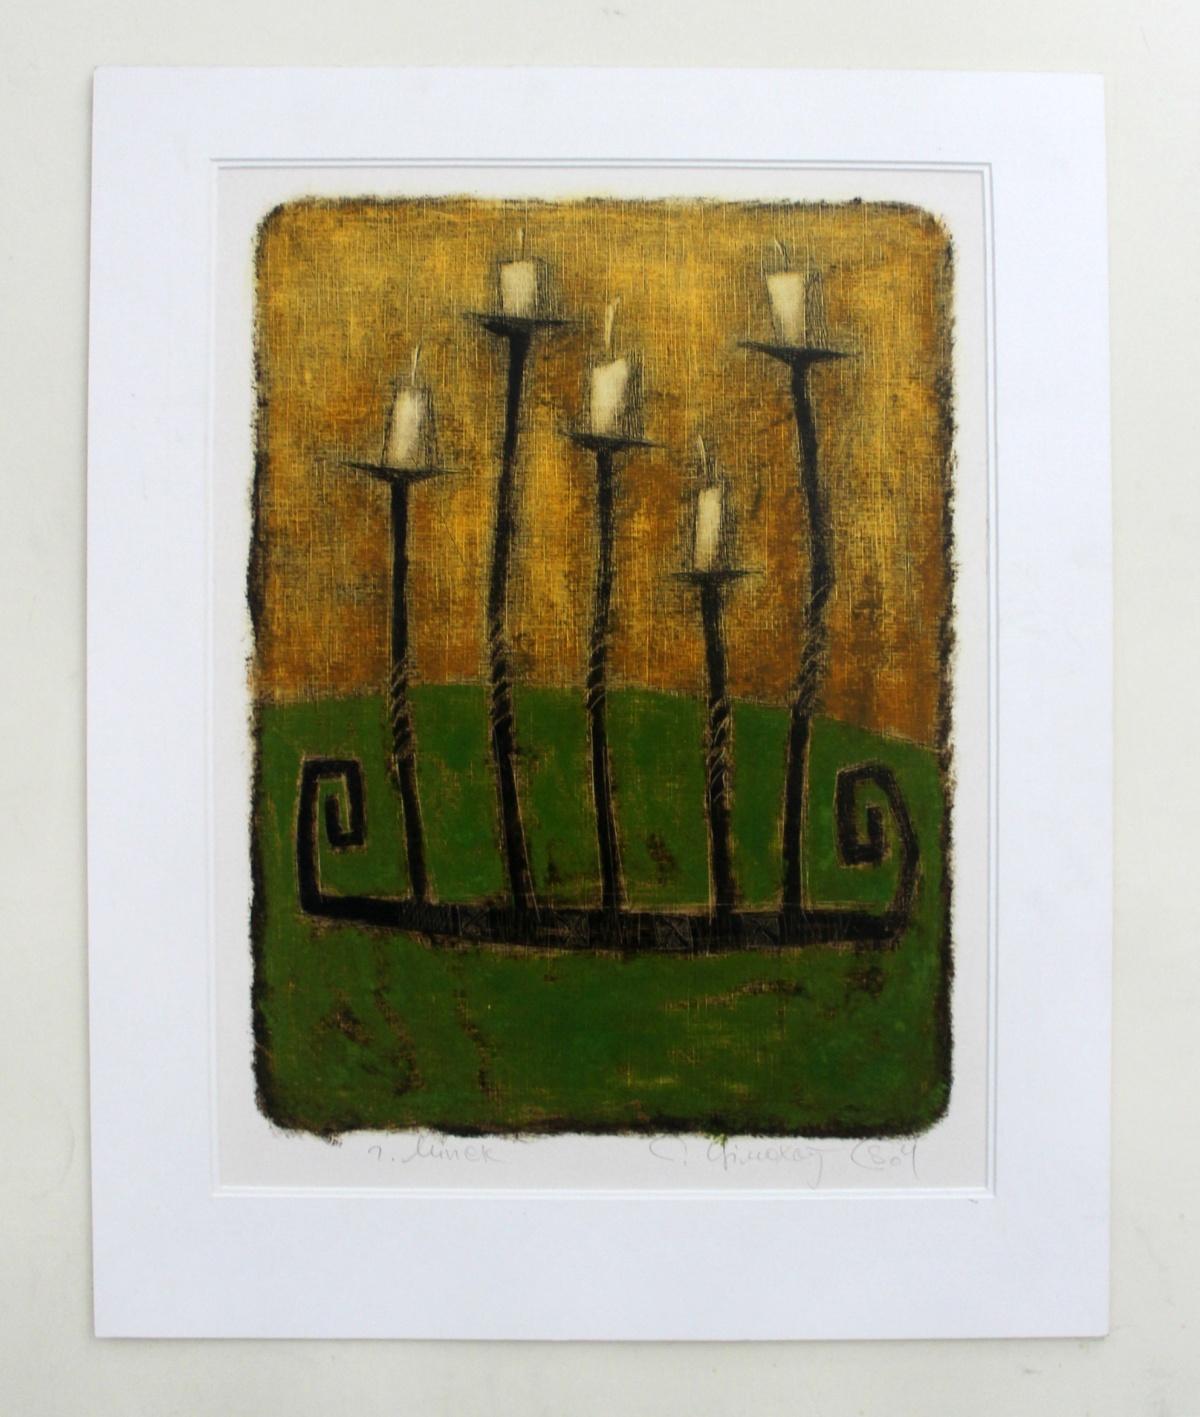 Candlestick - Contemporary Figurative Monotype Print, Warm tones, Still life - Brown Figurative Print by Siergiej Timochow